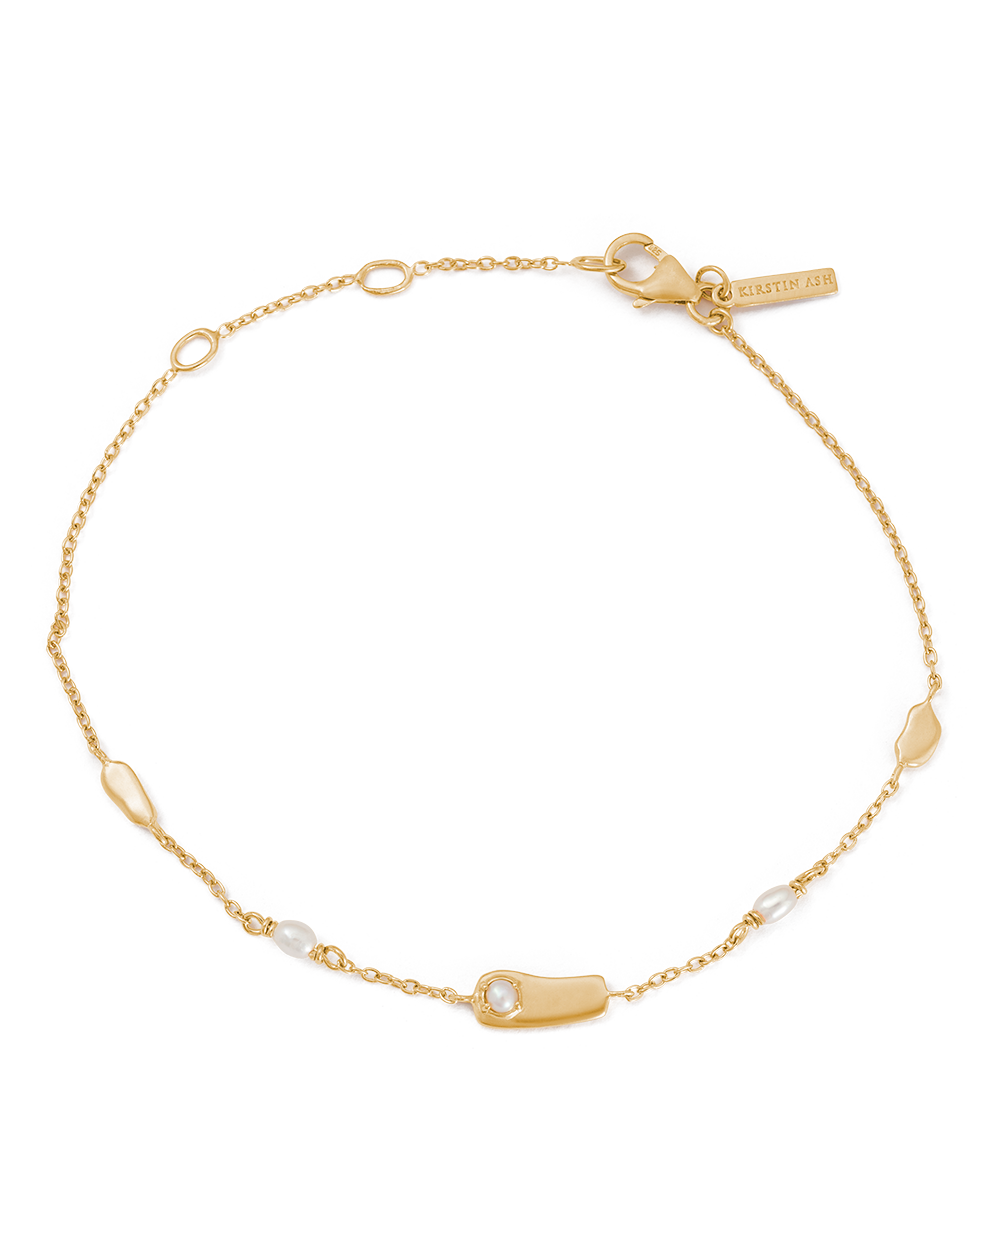 VACANZA BRACELET (18K GOLD PLATED)